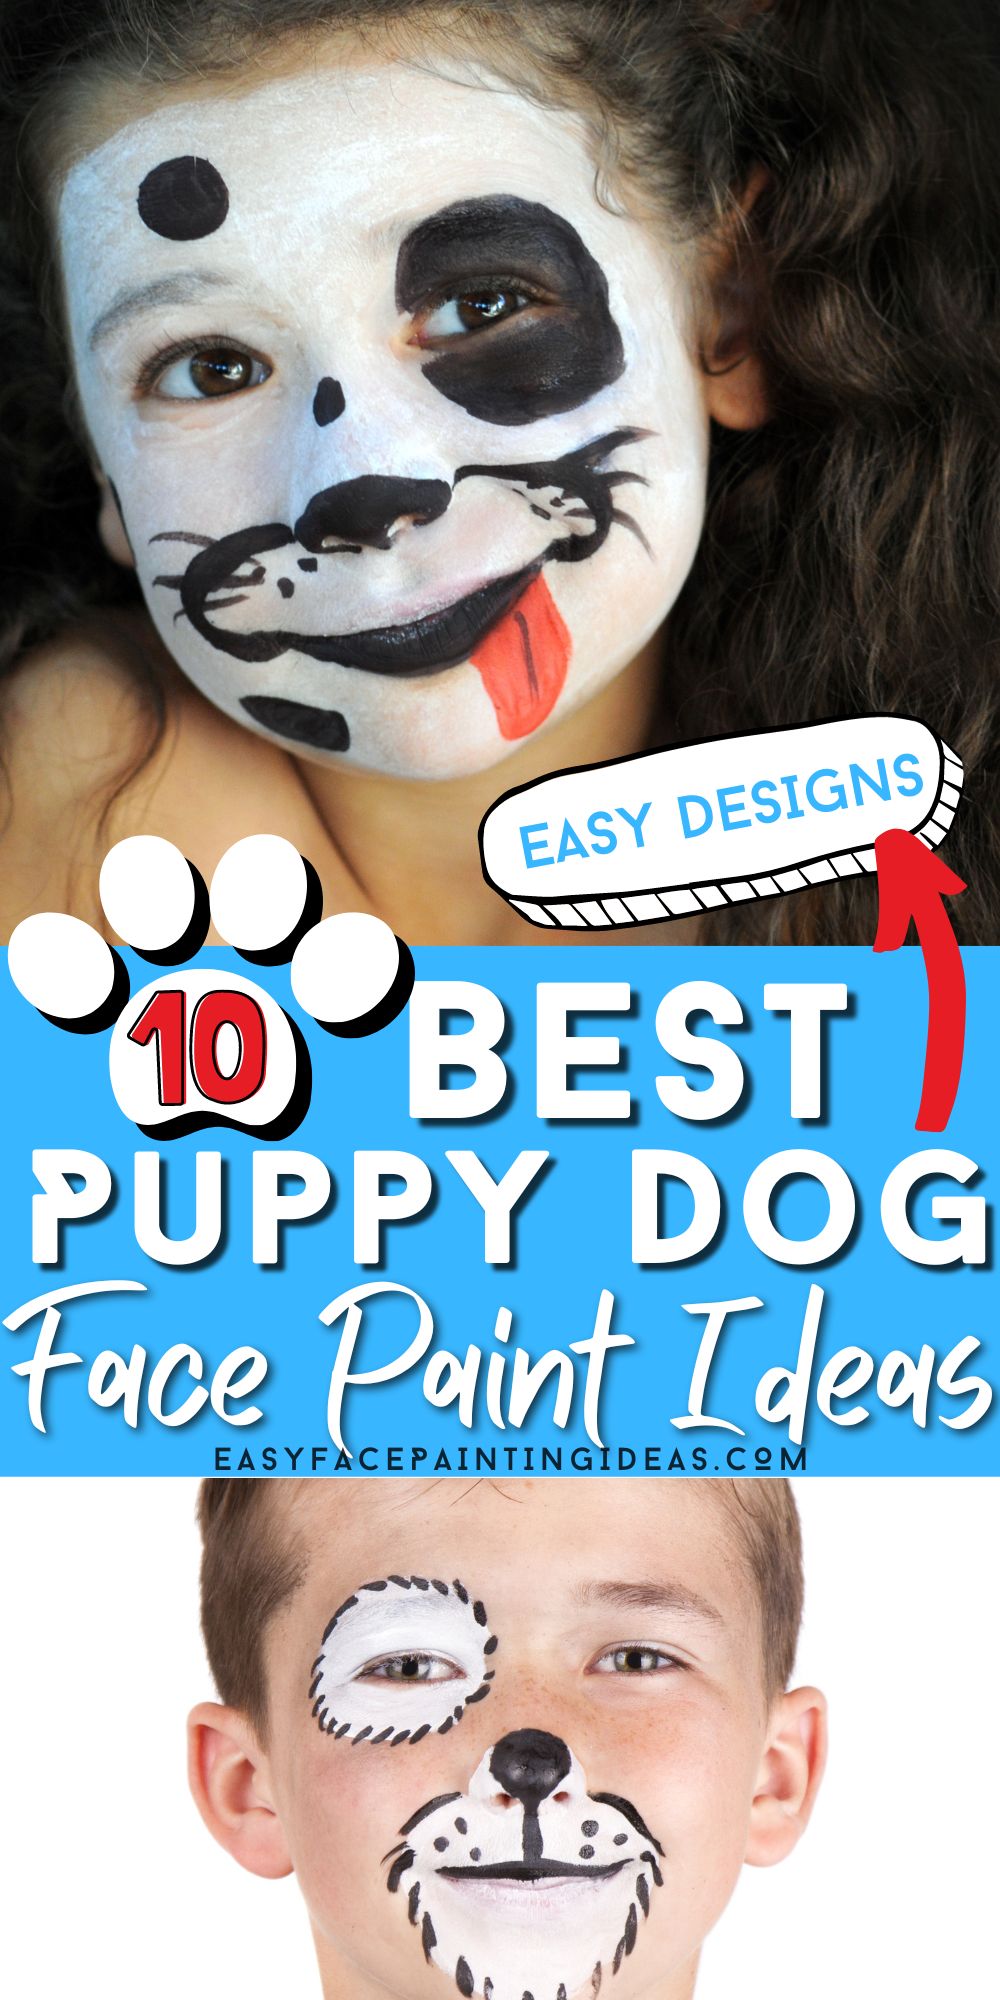 collage of two photos, each showing a child with their face painted like a puppy dog. An overlay reads, "10 Best Puppy Dog Face Paint Ideas"